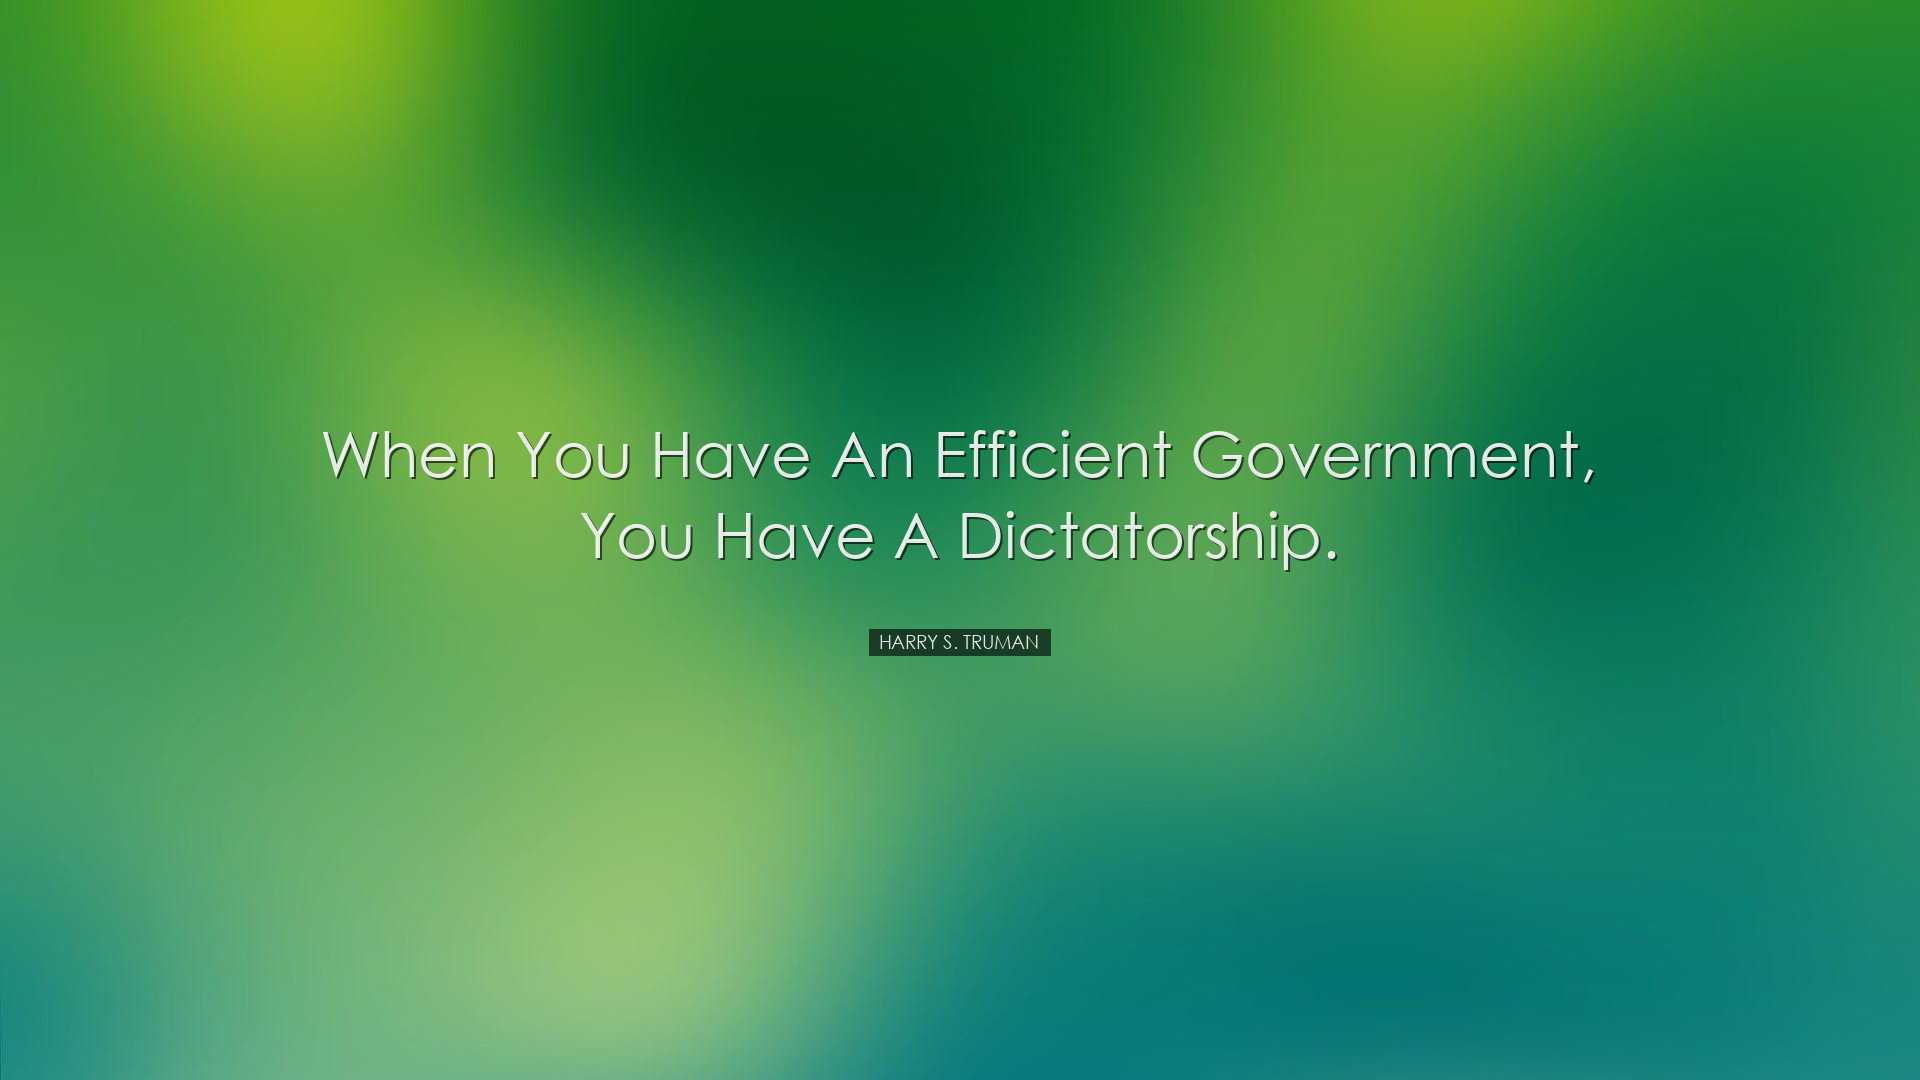 When you have an efficient government, you have a dictatorship. -